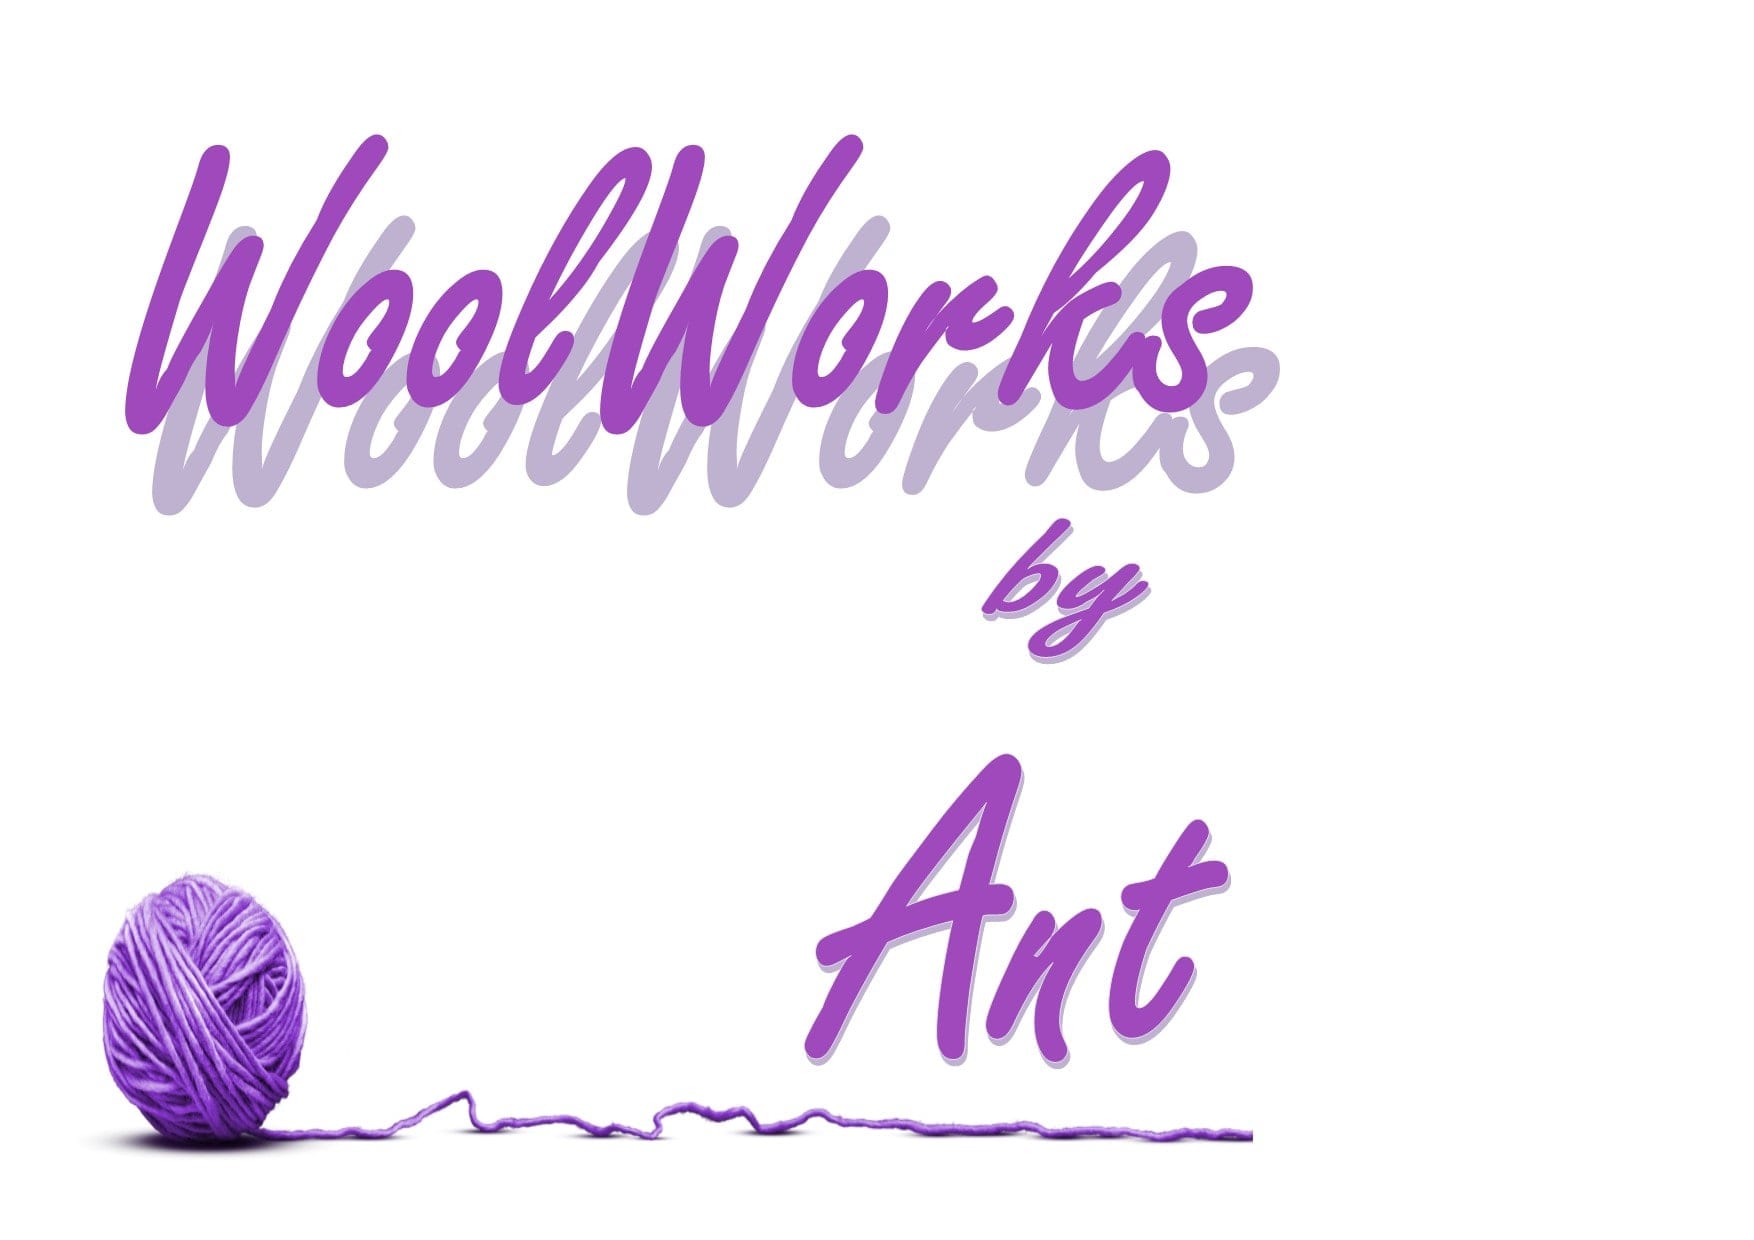 WoolWorks by Ant